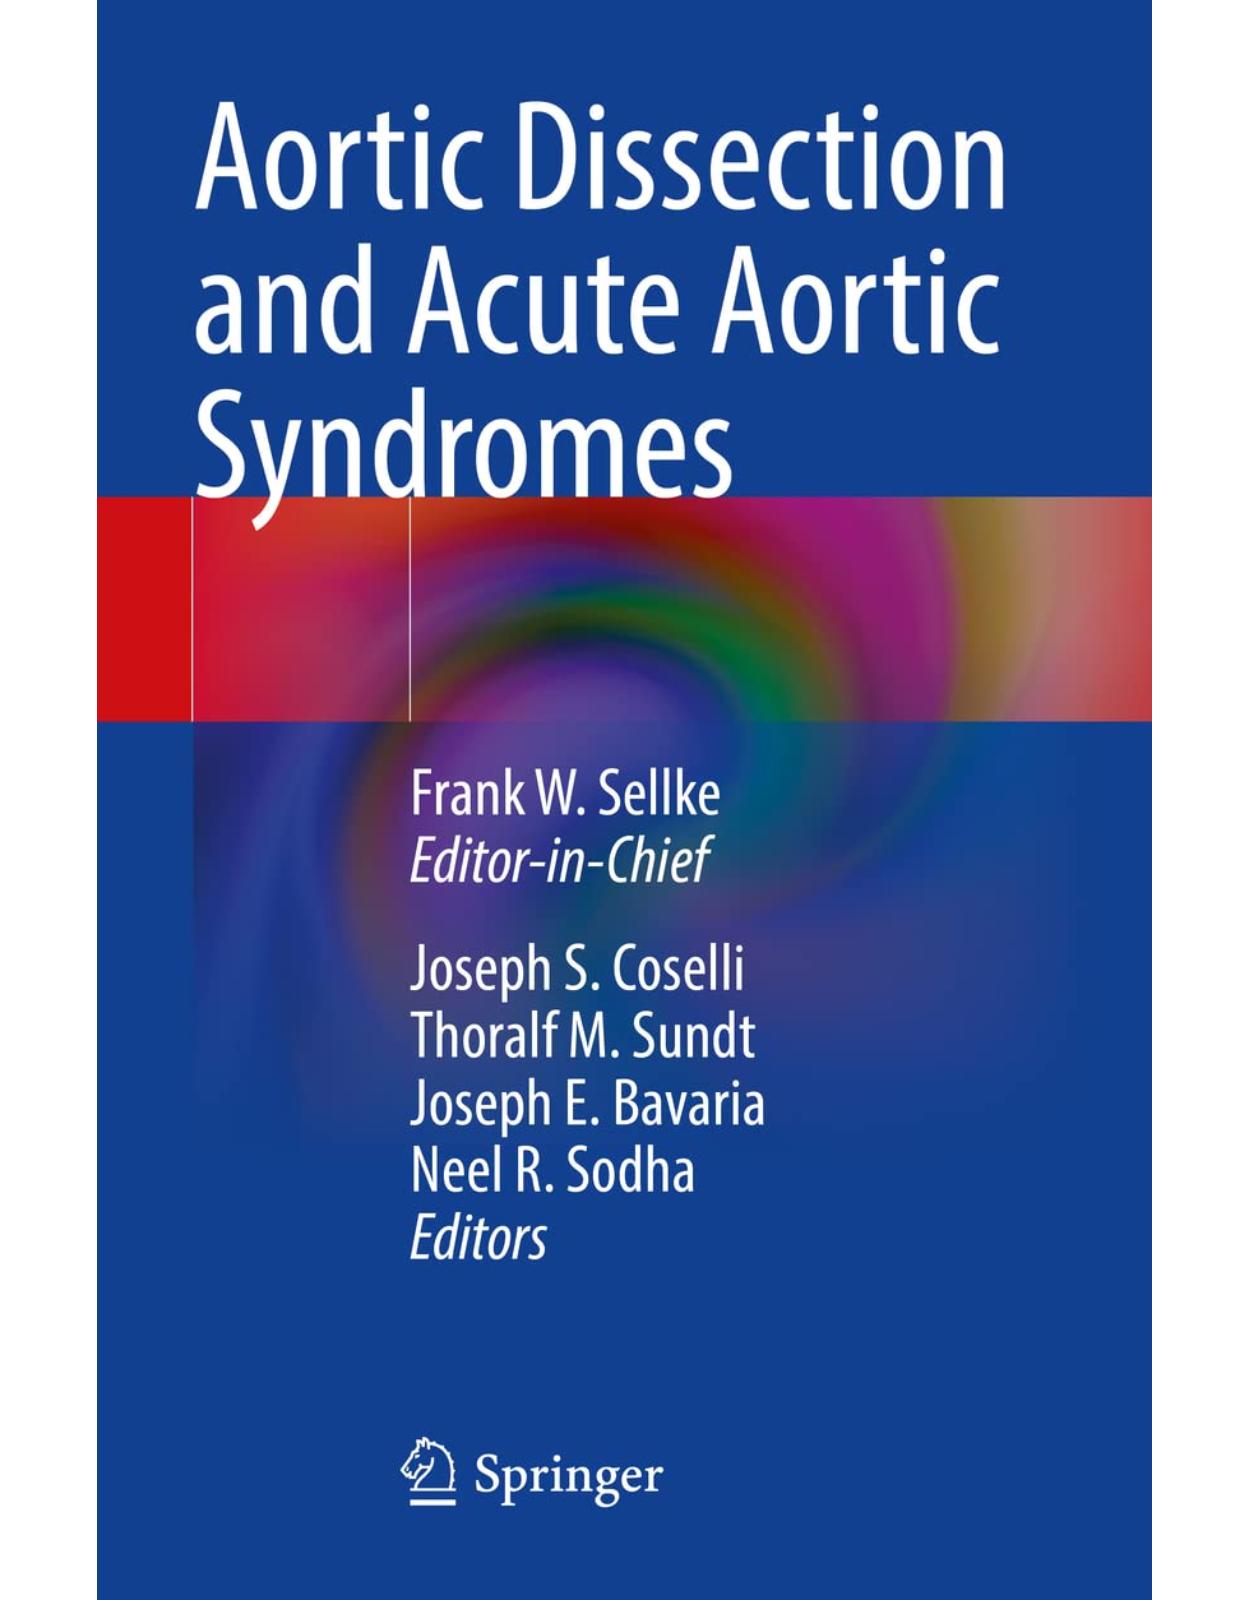 Aortic Dissection and Acute Aortic Syndromes